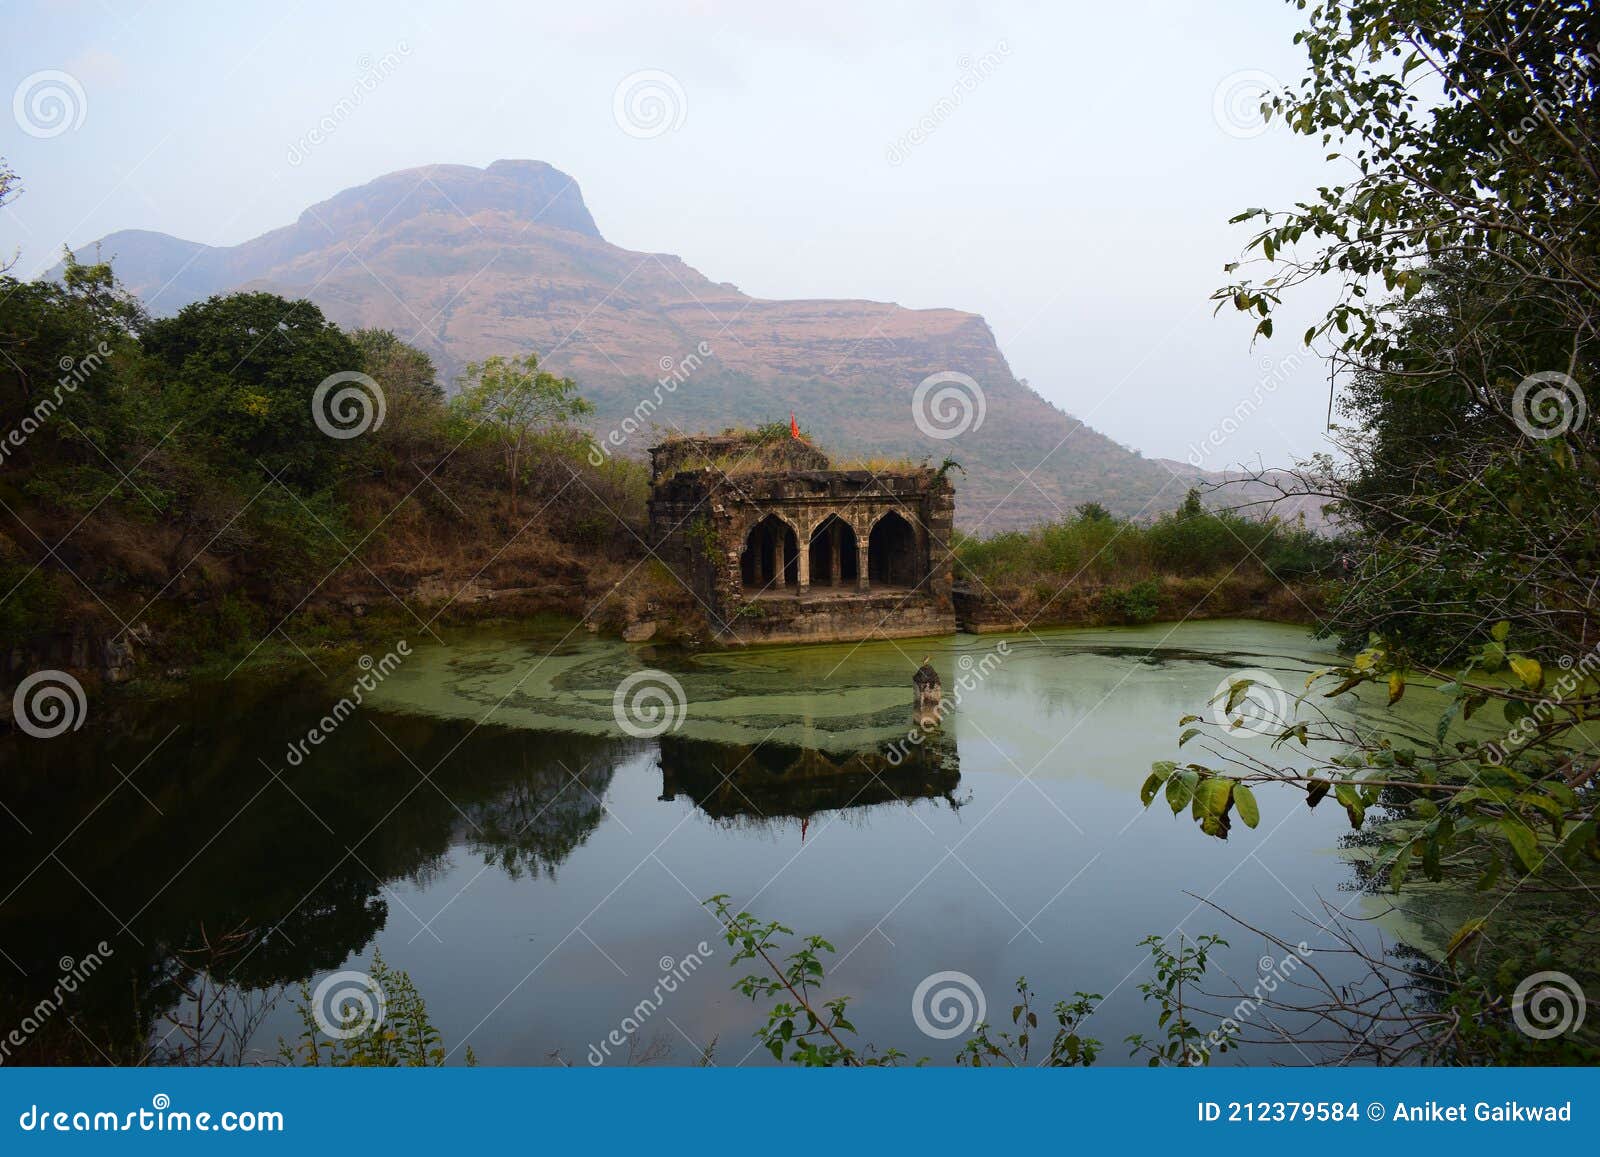 old mulher fort in sahyadri ghat